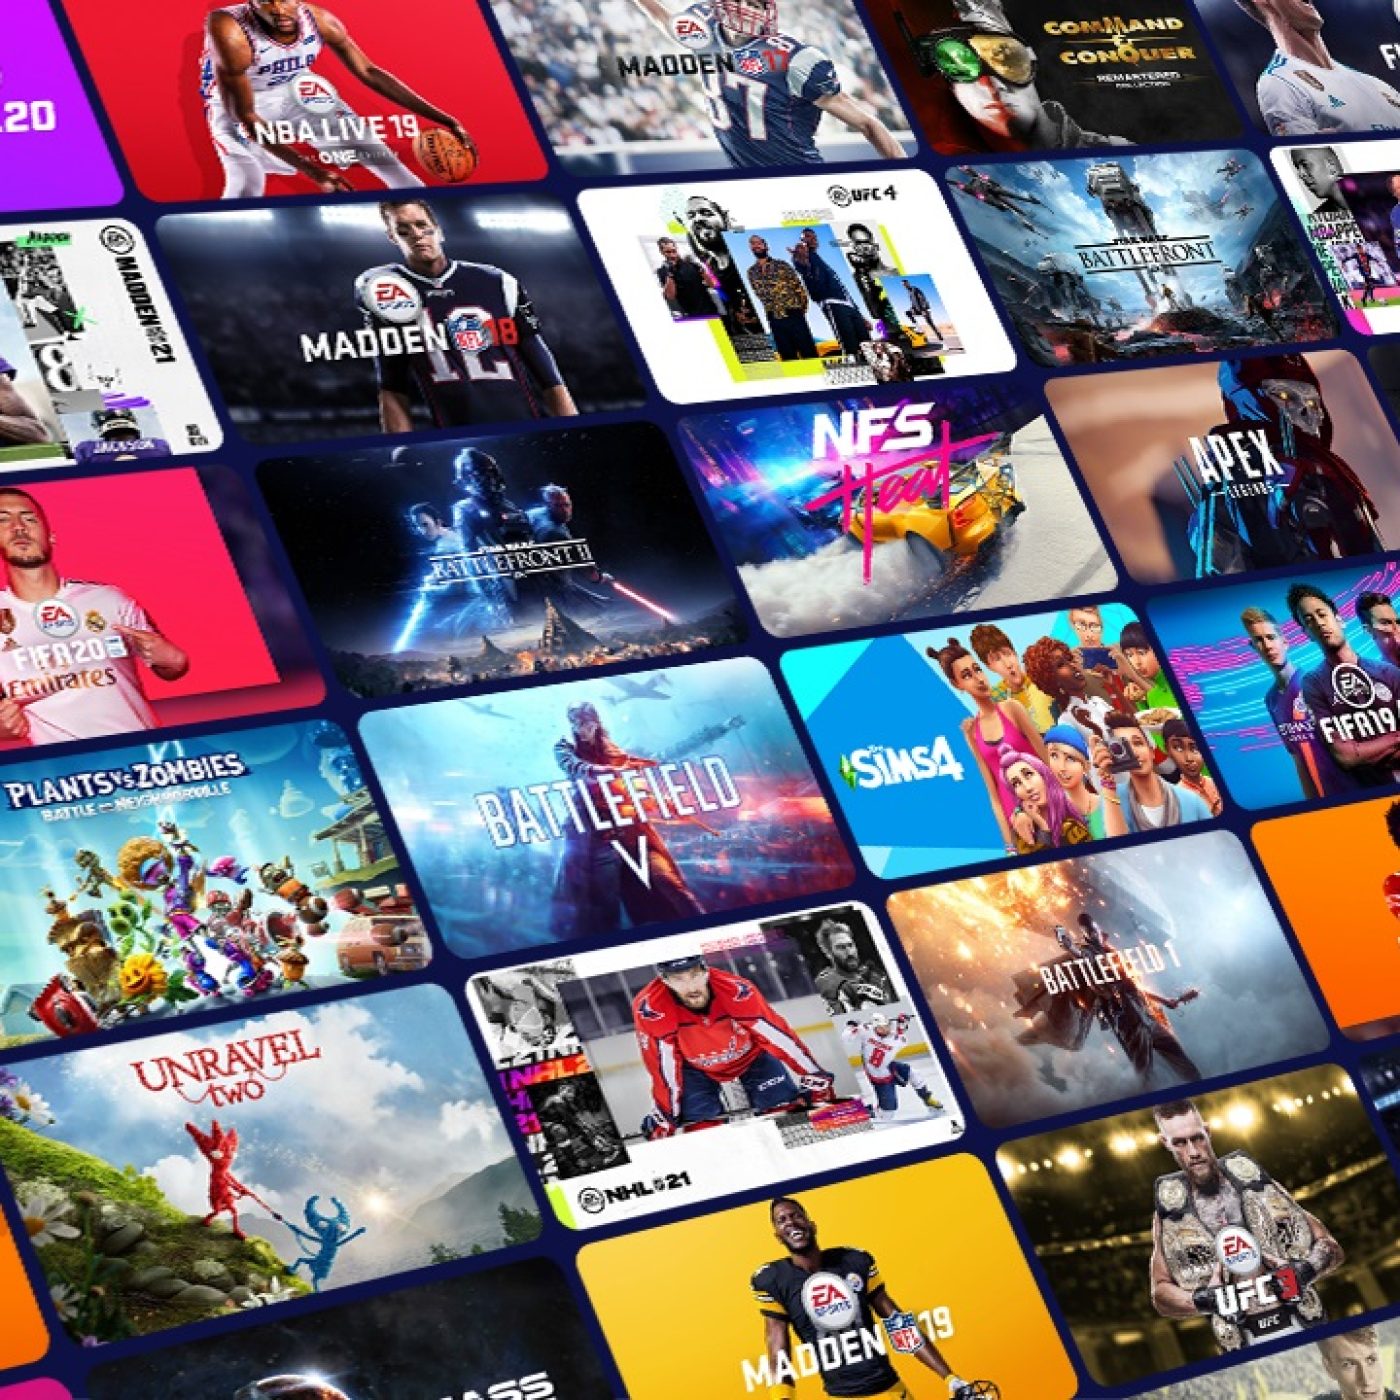 Microsoft Starts Testing PC And Xbox Game Pass Family Plan In